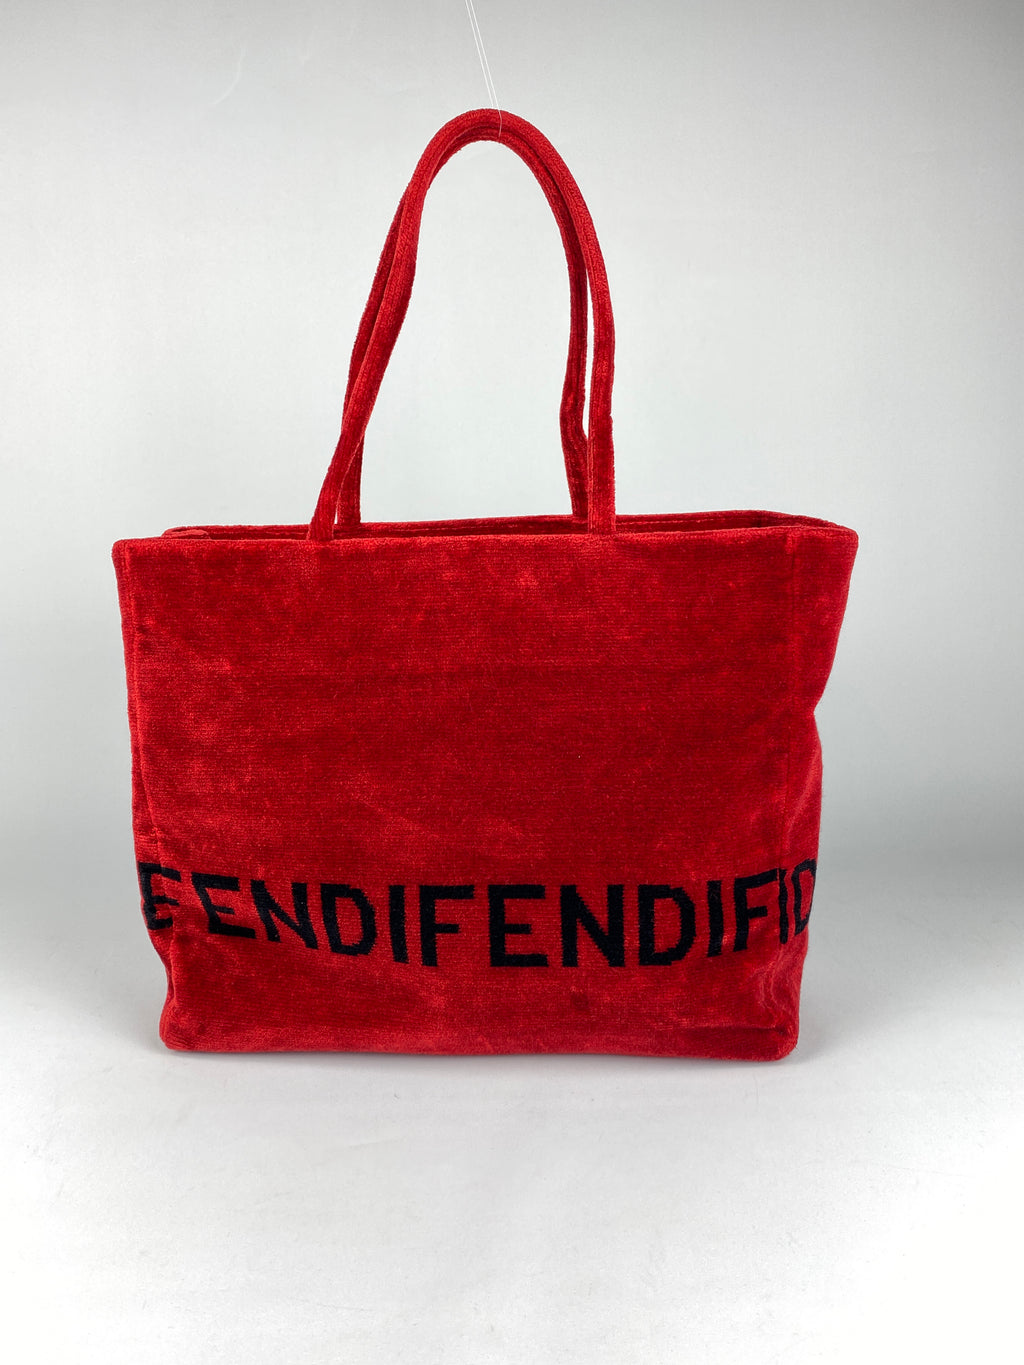 FENDI - RED VELOUR TOTE BAG - MADE IN ITALY VINTAGE